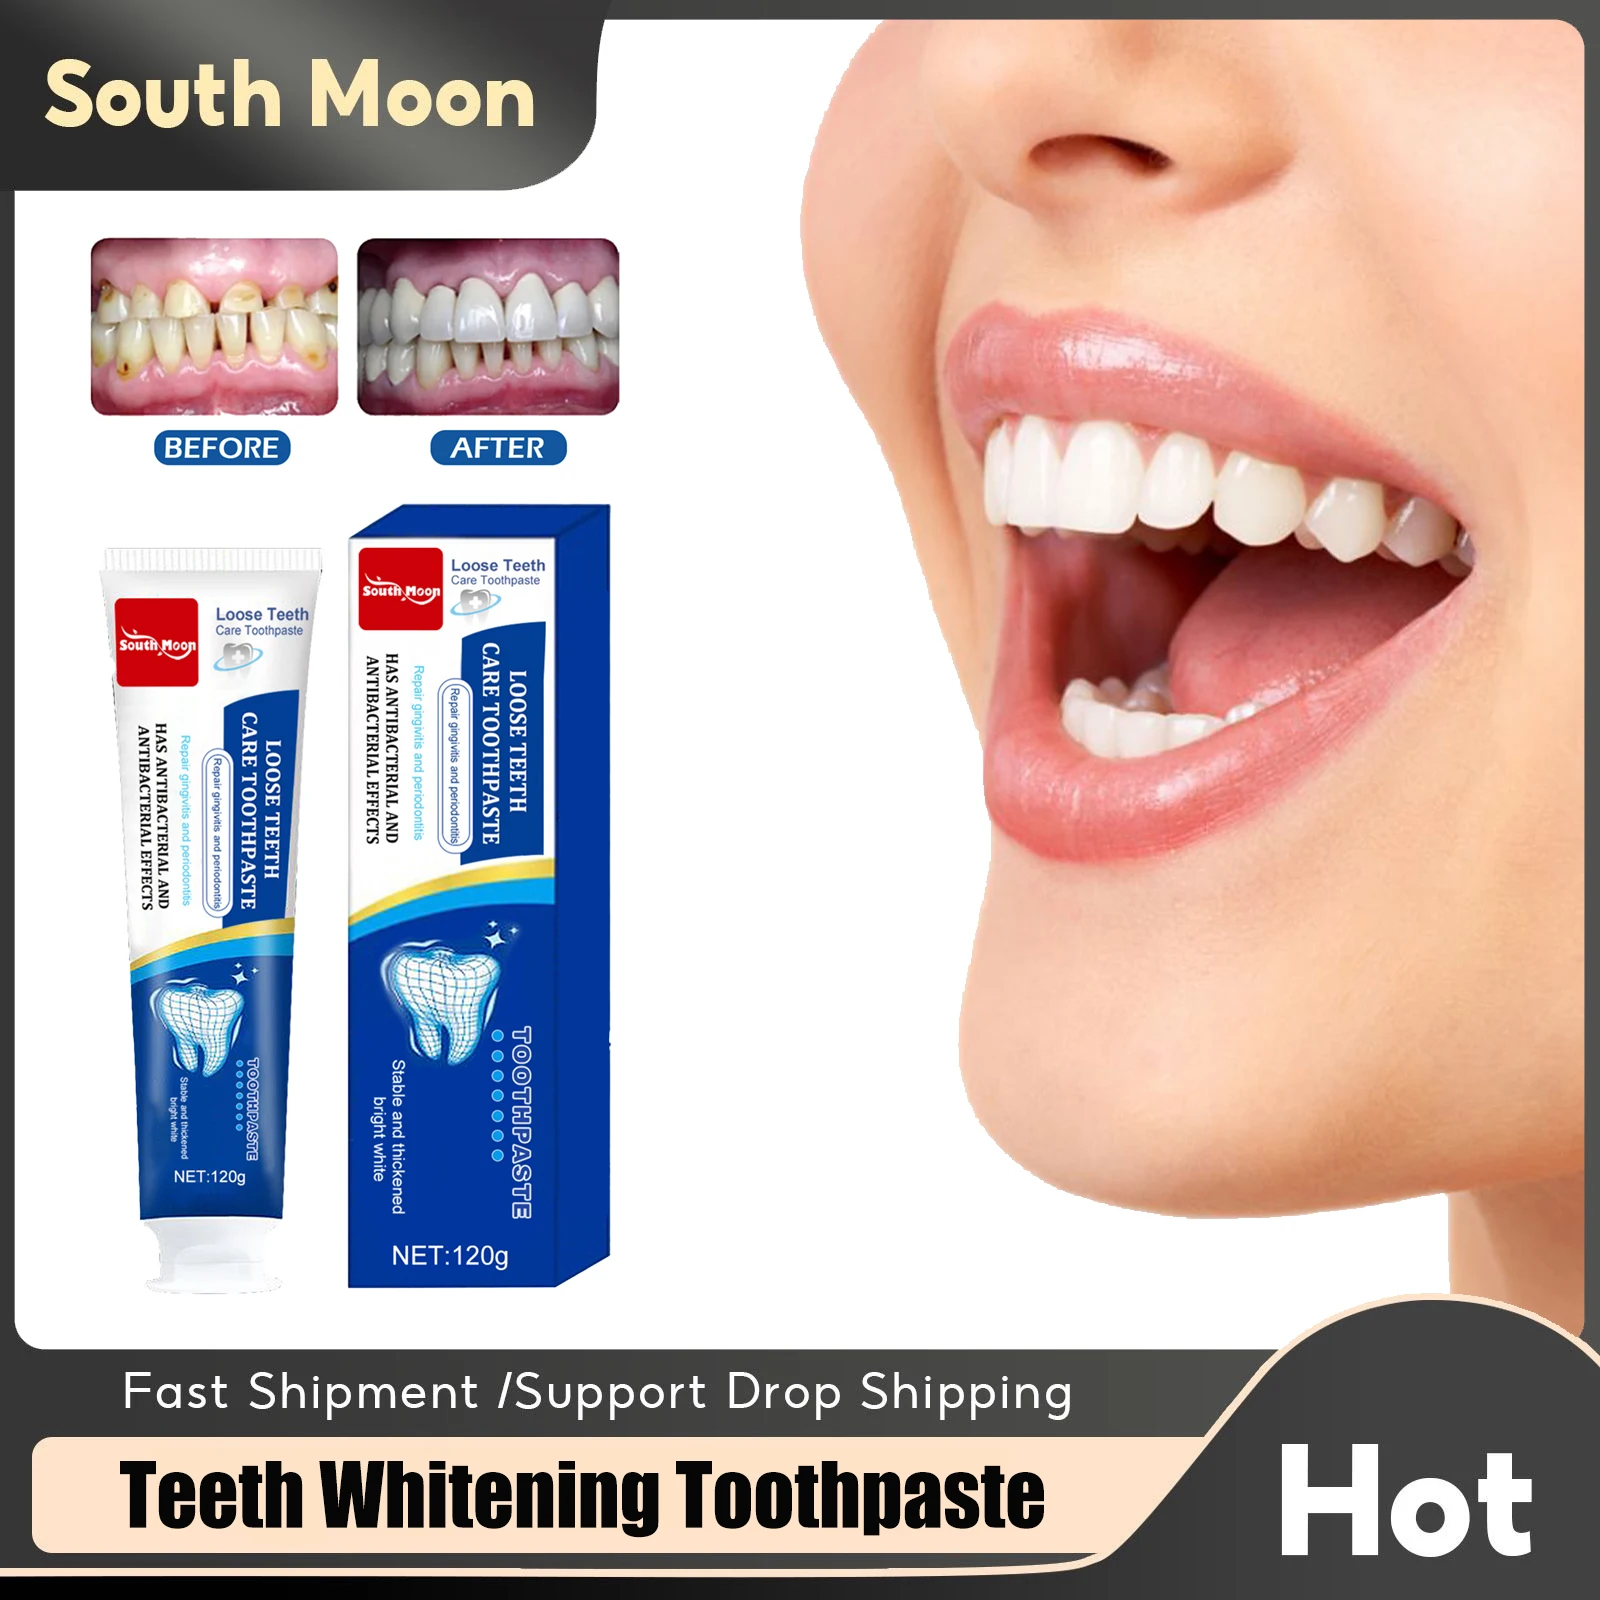 

Loose Teeth Care Toothpaste Quick Repair Cavities Deep Cleaning Remove Plaques Stains Freshen Breath Teeth Whitening Toothpaste